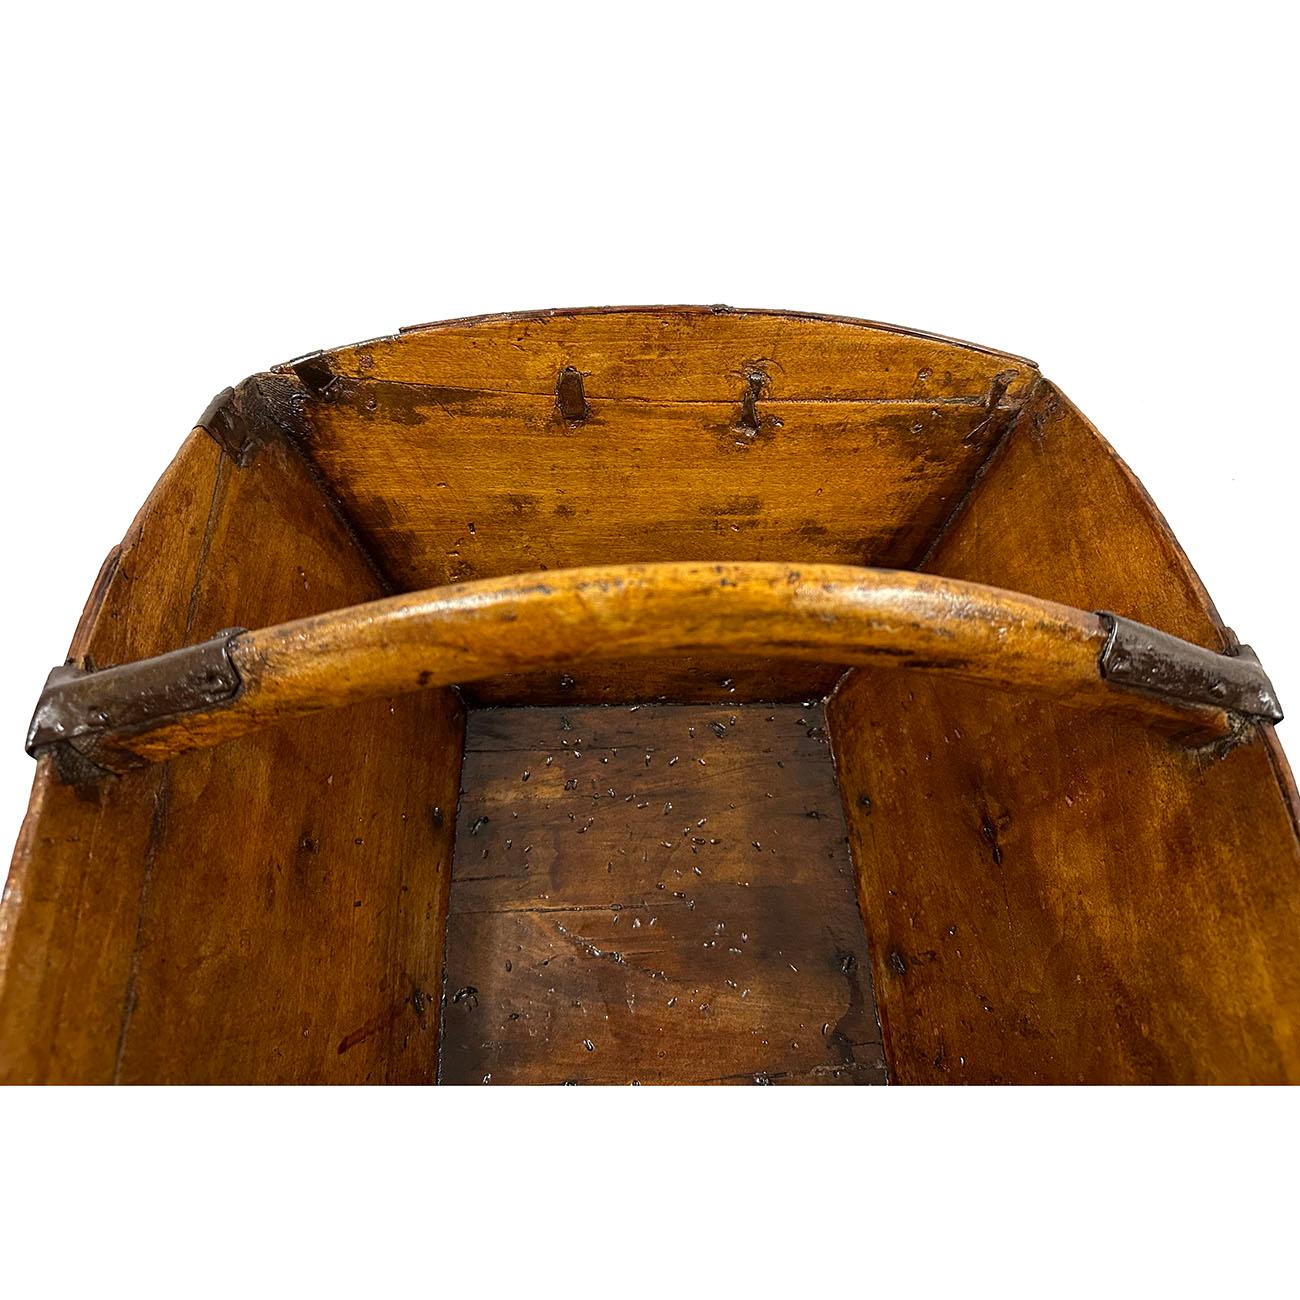 19th Century Antique Chinese Wooden Rice Measure Bucket For Sale 2